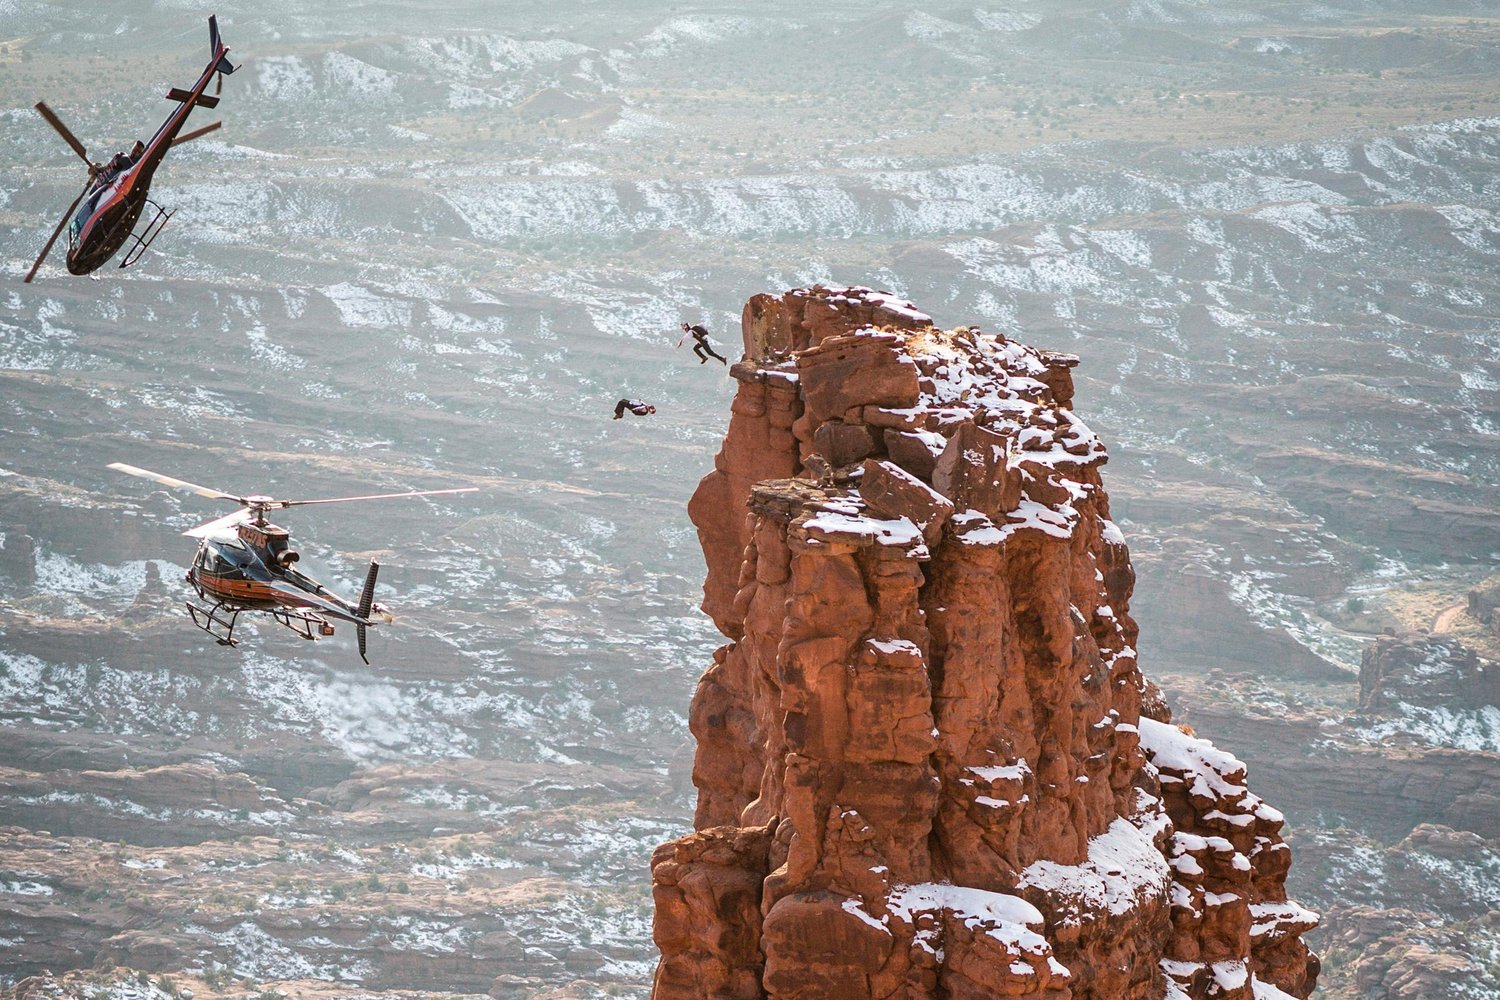 Red Bull Air Force Shows All the Ways Humans Take Flight in One Epic Video